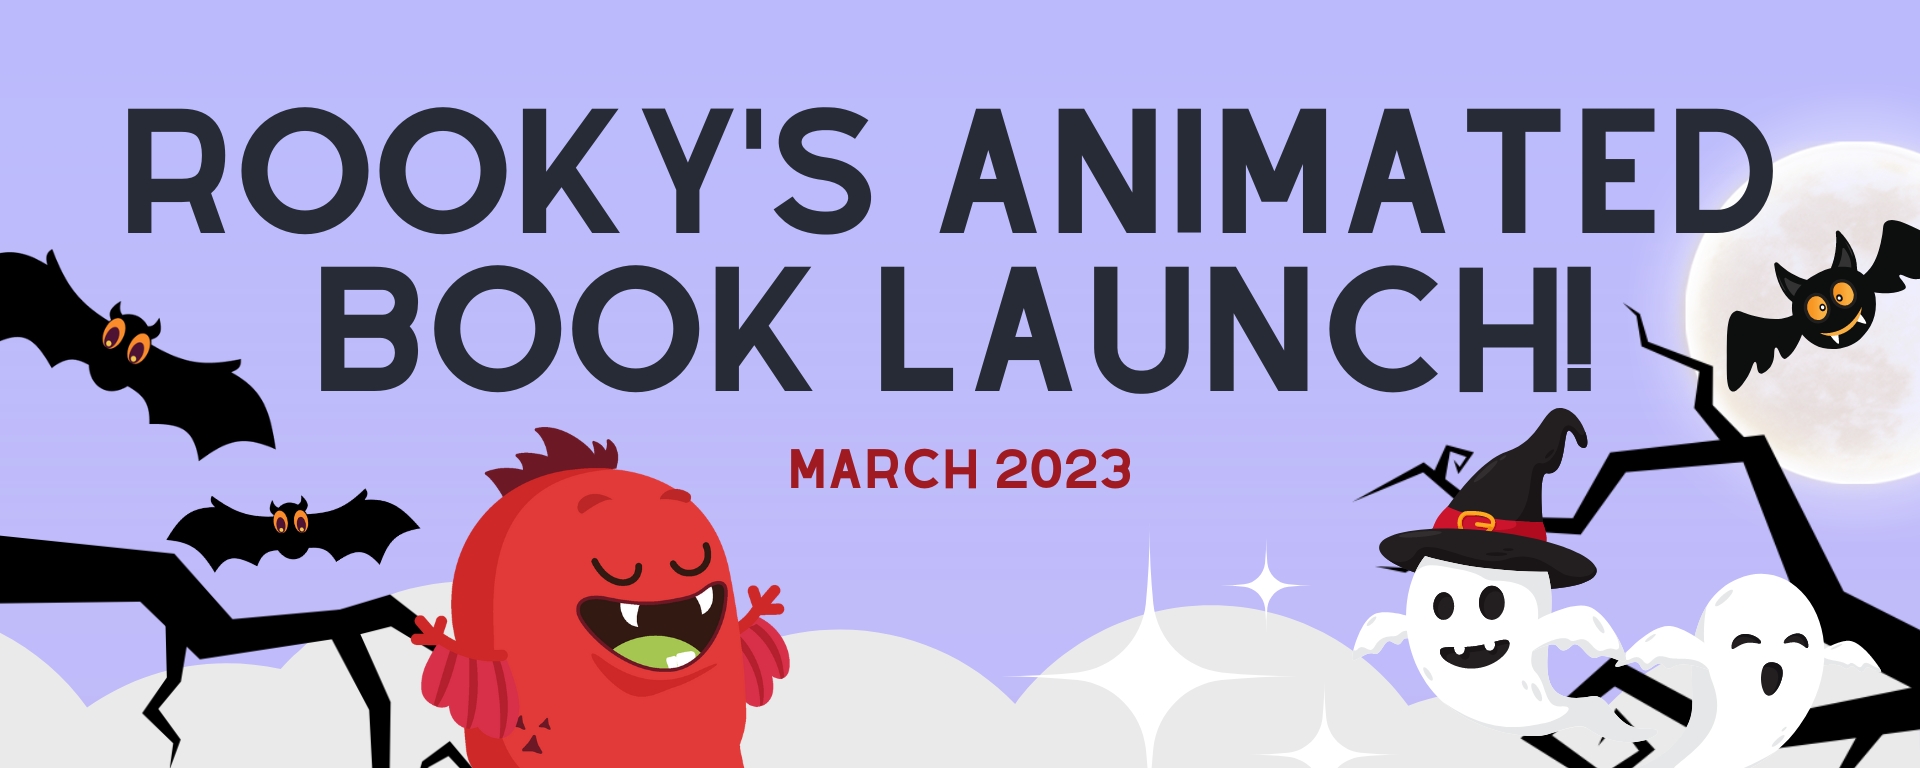 Rooky’s Animated Book Launch